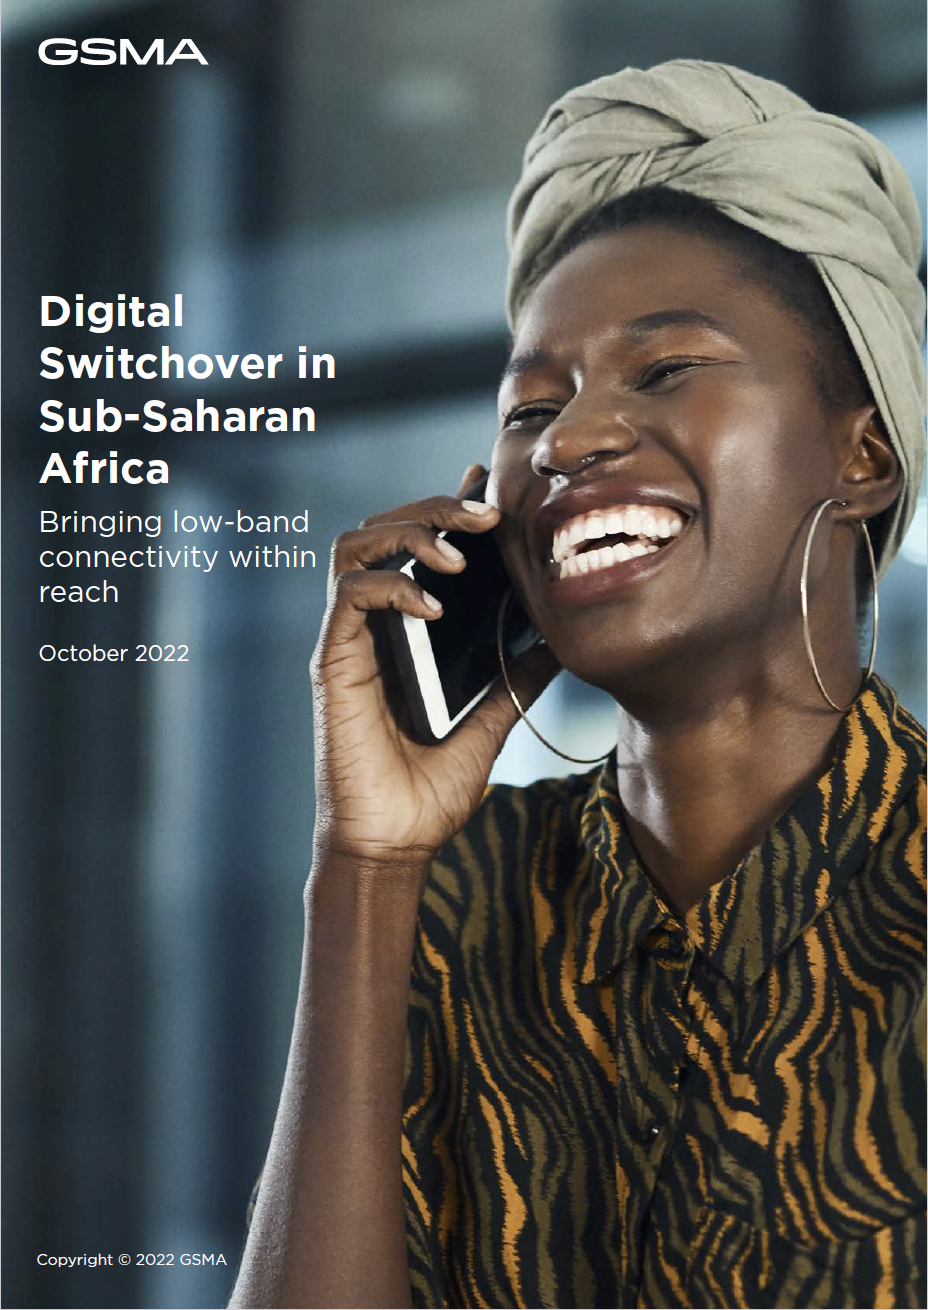 Focus on the Digital Switchover Process in Sub-Saharan Africa image